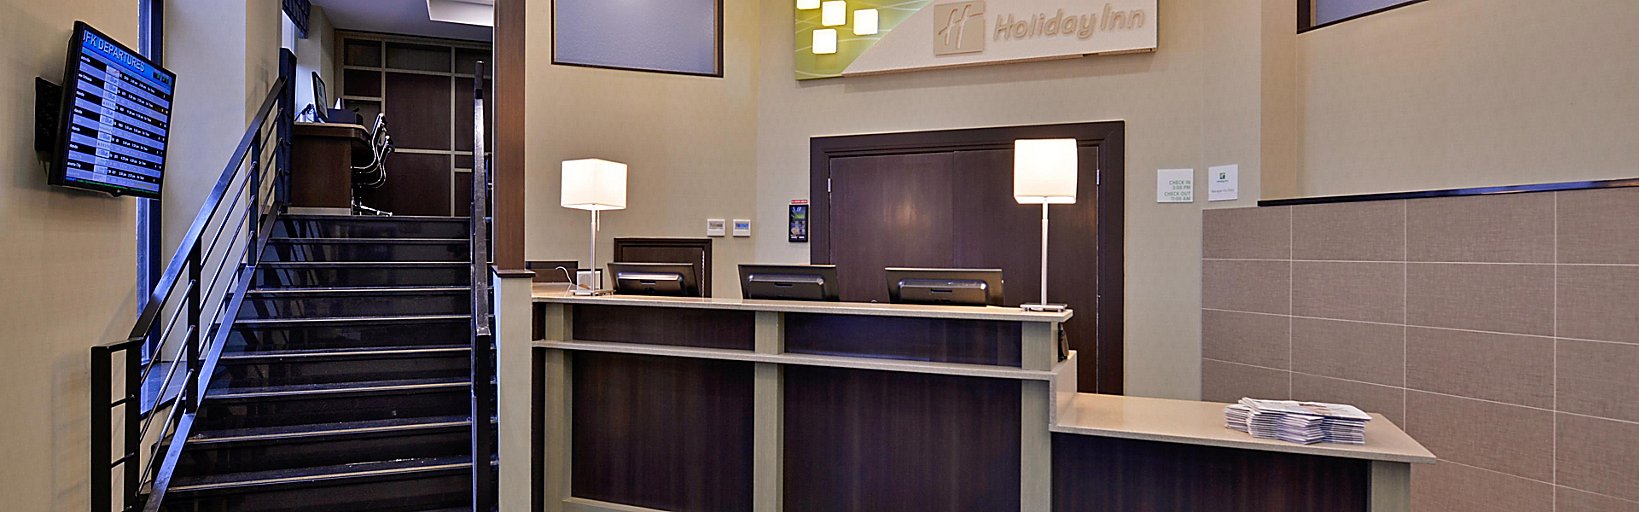 Jfk Airport Hotels In Queens Nyc Holiday Inn New York Jfk